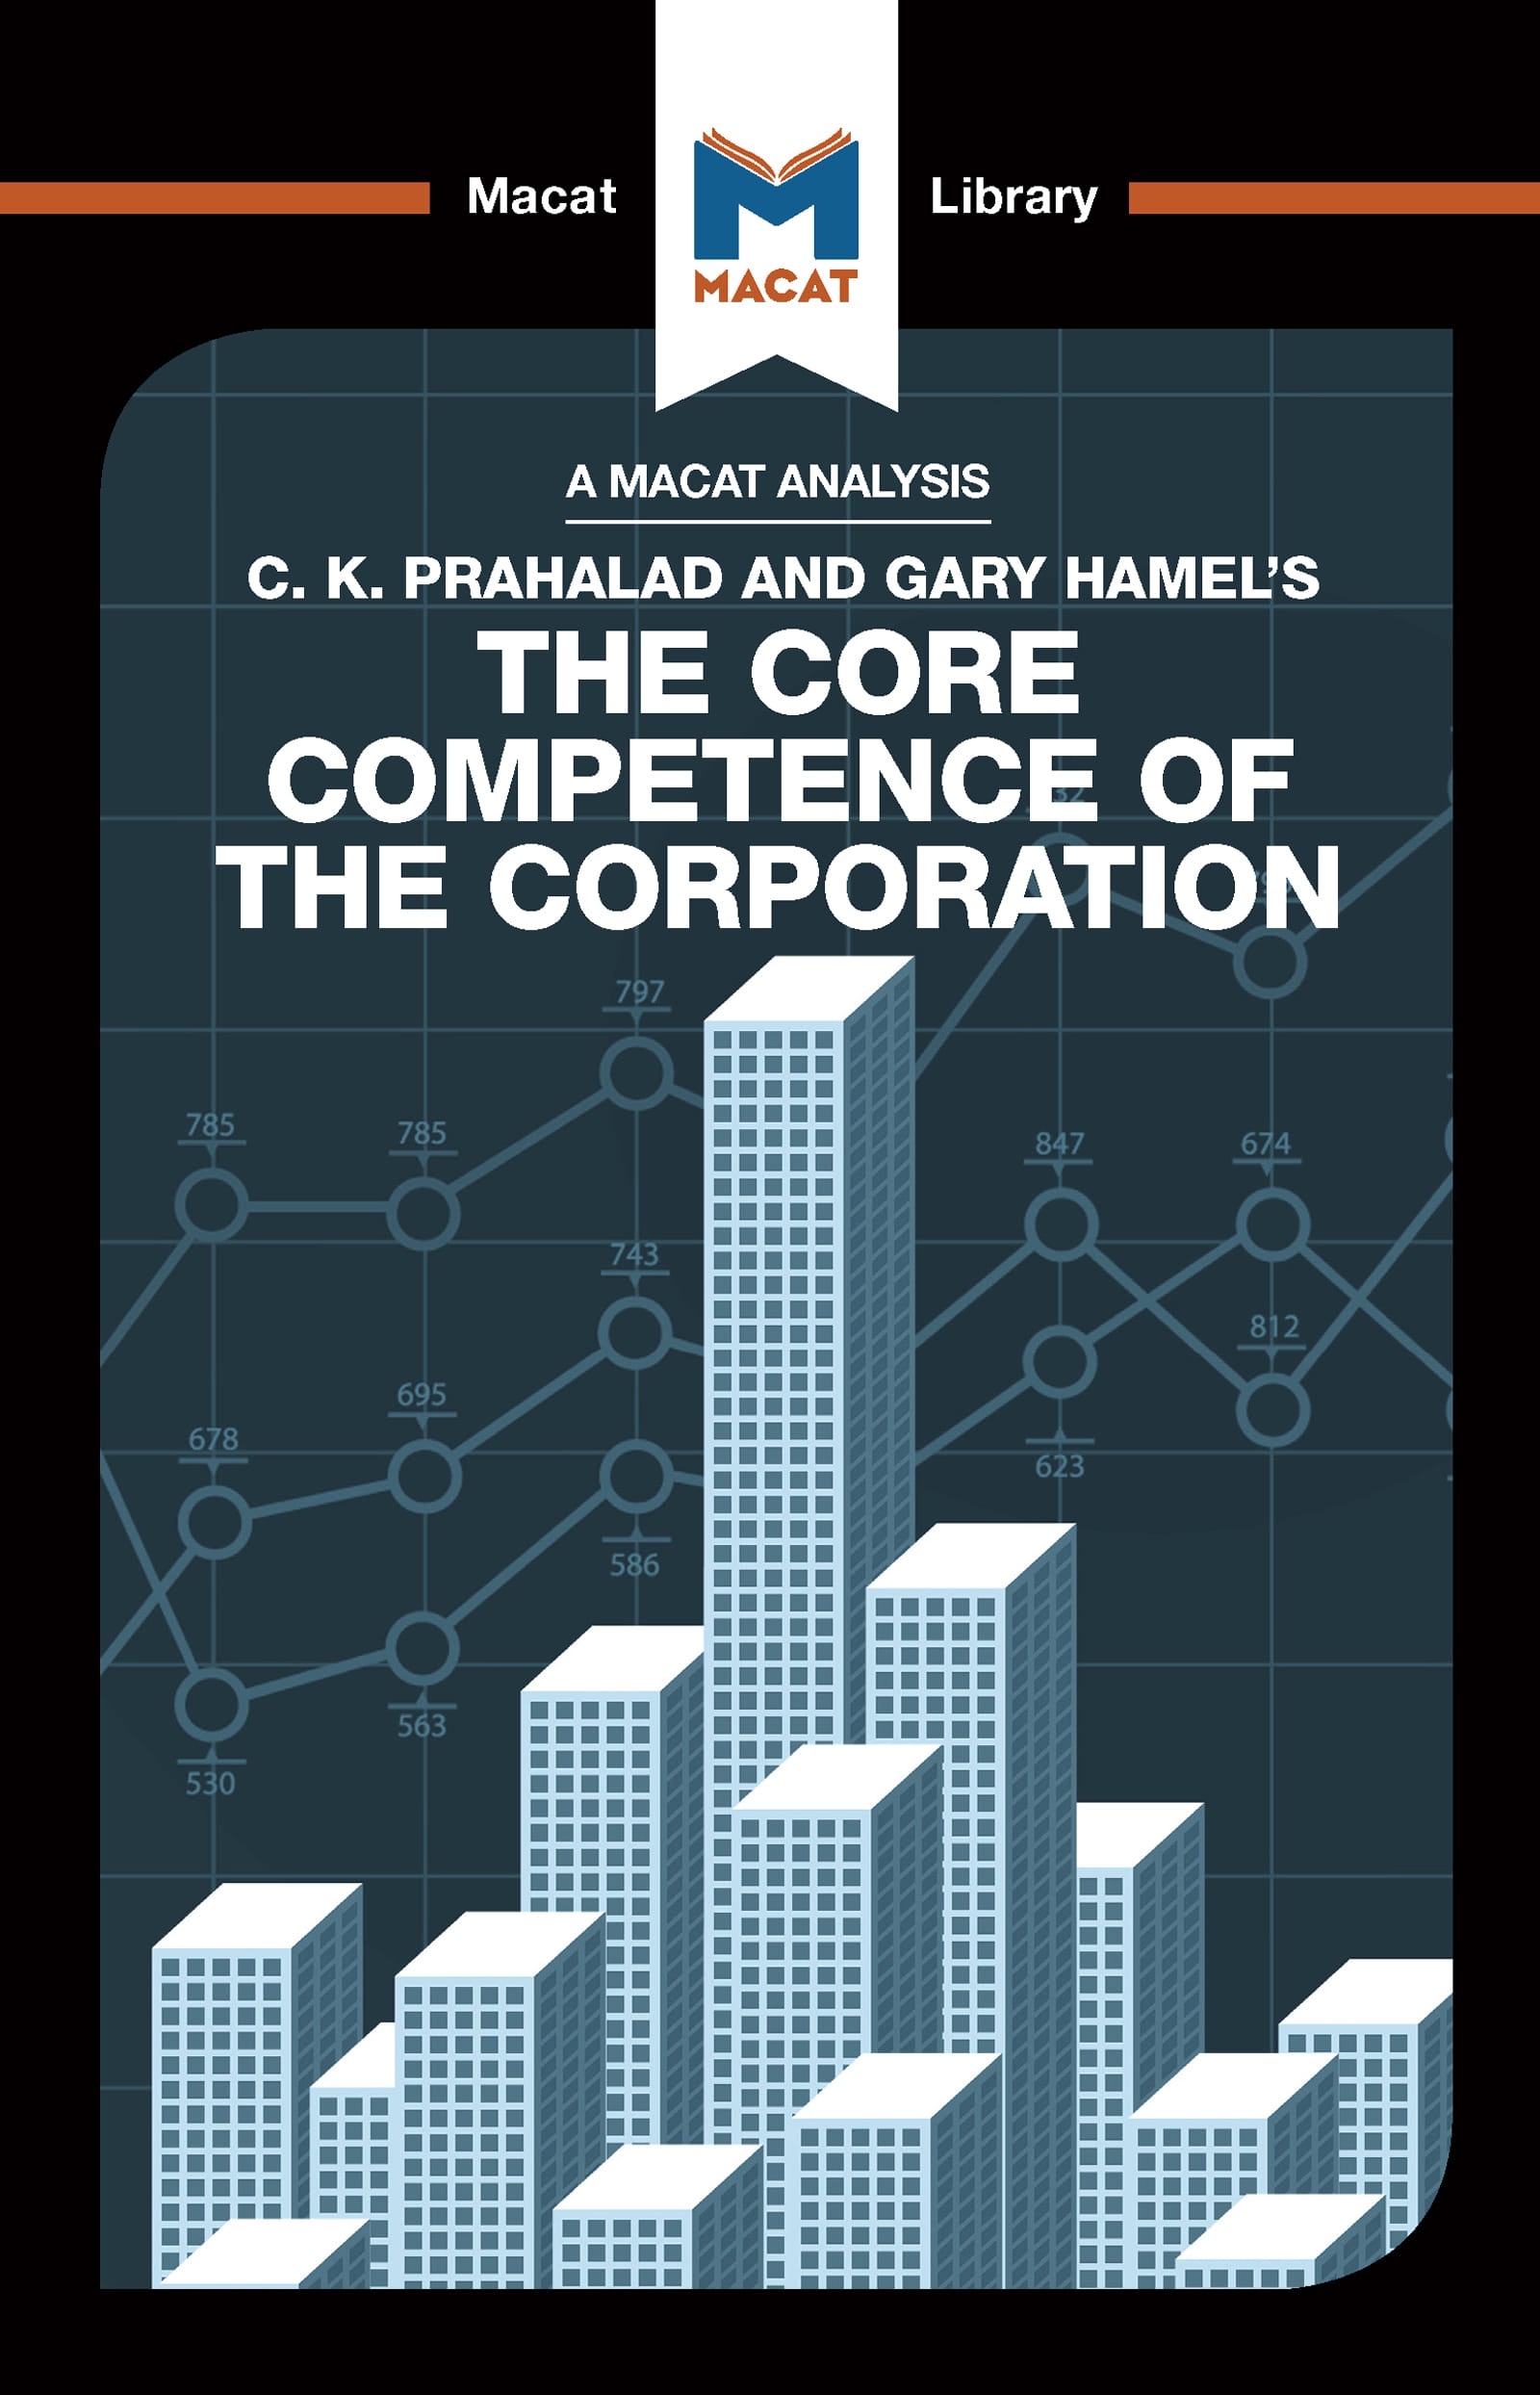 An Analysis of C.K. Prahalad and Gary Hamel’’s the Core Competence of the Corporation